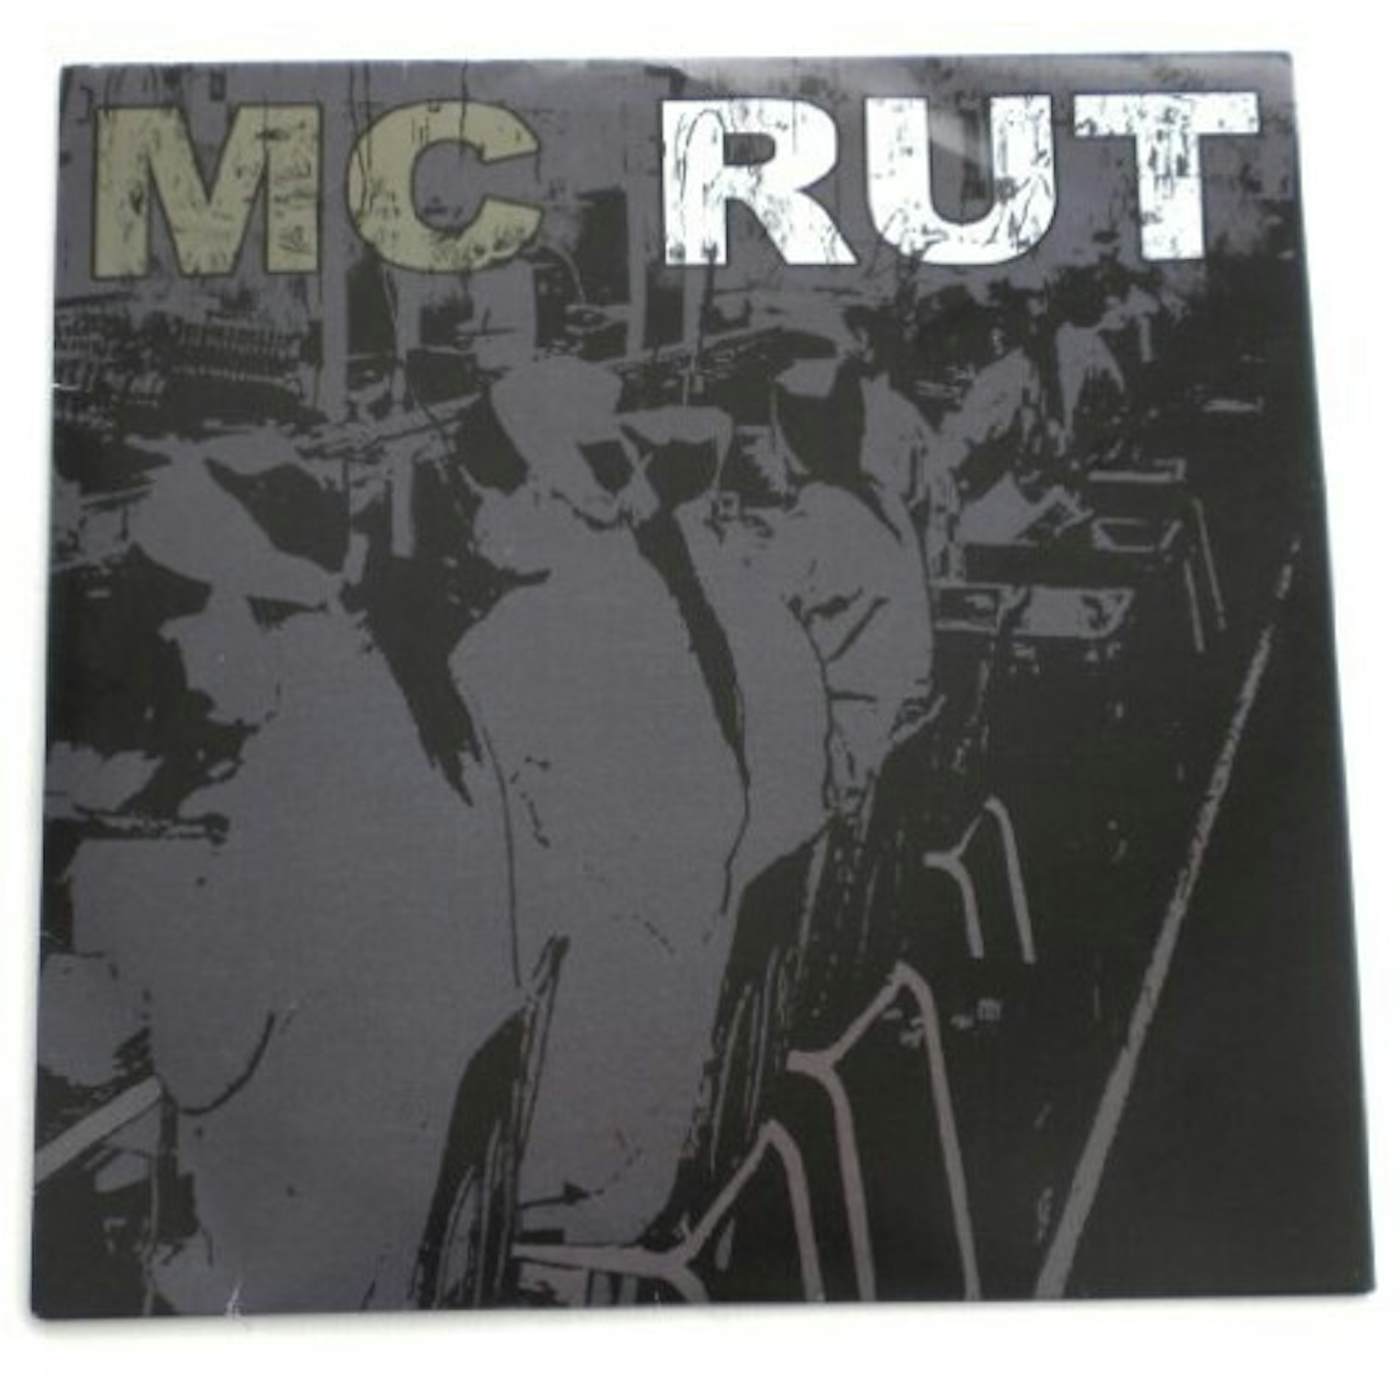 Middle Class Rut BUSY BEIN' BORN / START TO RUN Vinyl Record